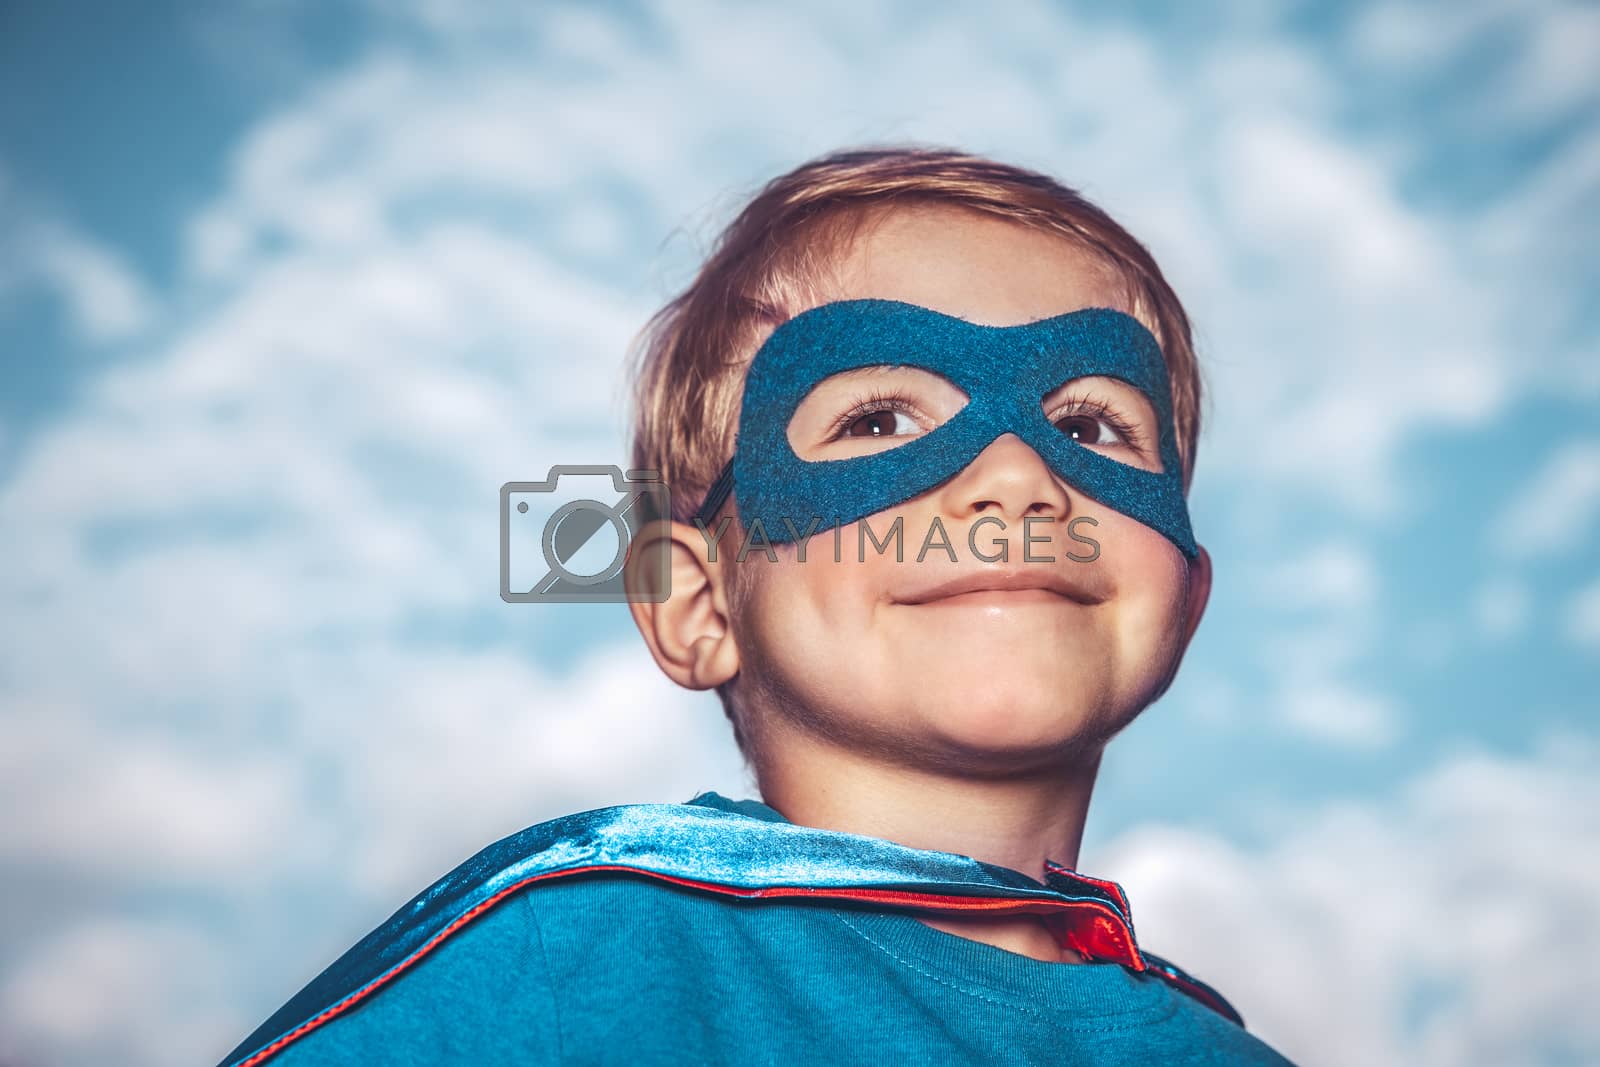 Royalty free image of Little superhero by Anna_Omelchenko